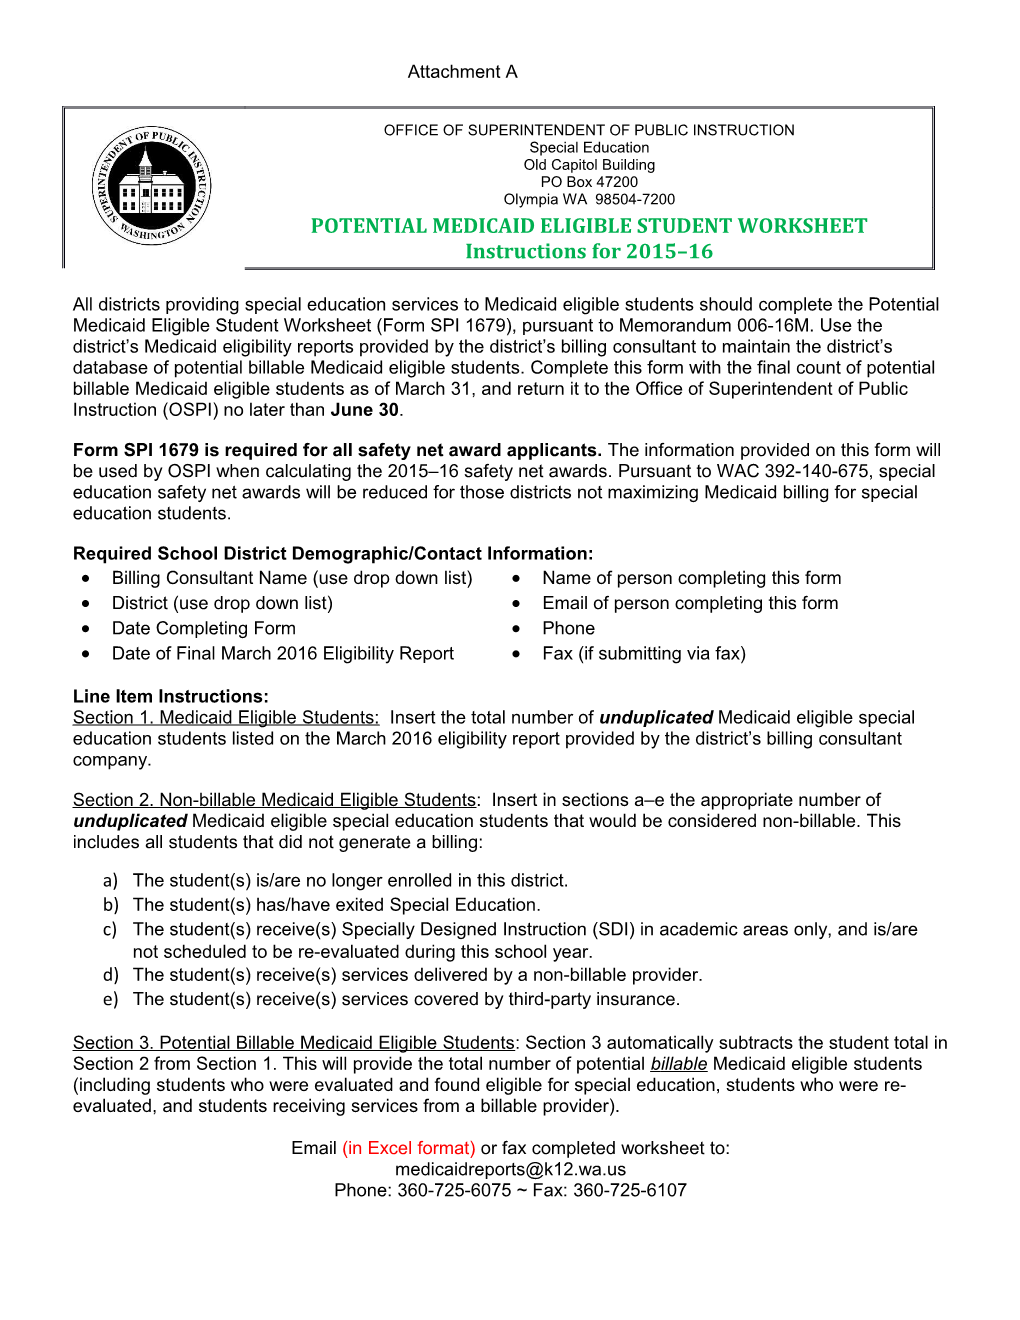 Potential Medicaid Eligible Student Worksheet Instructions for 2015-16